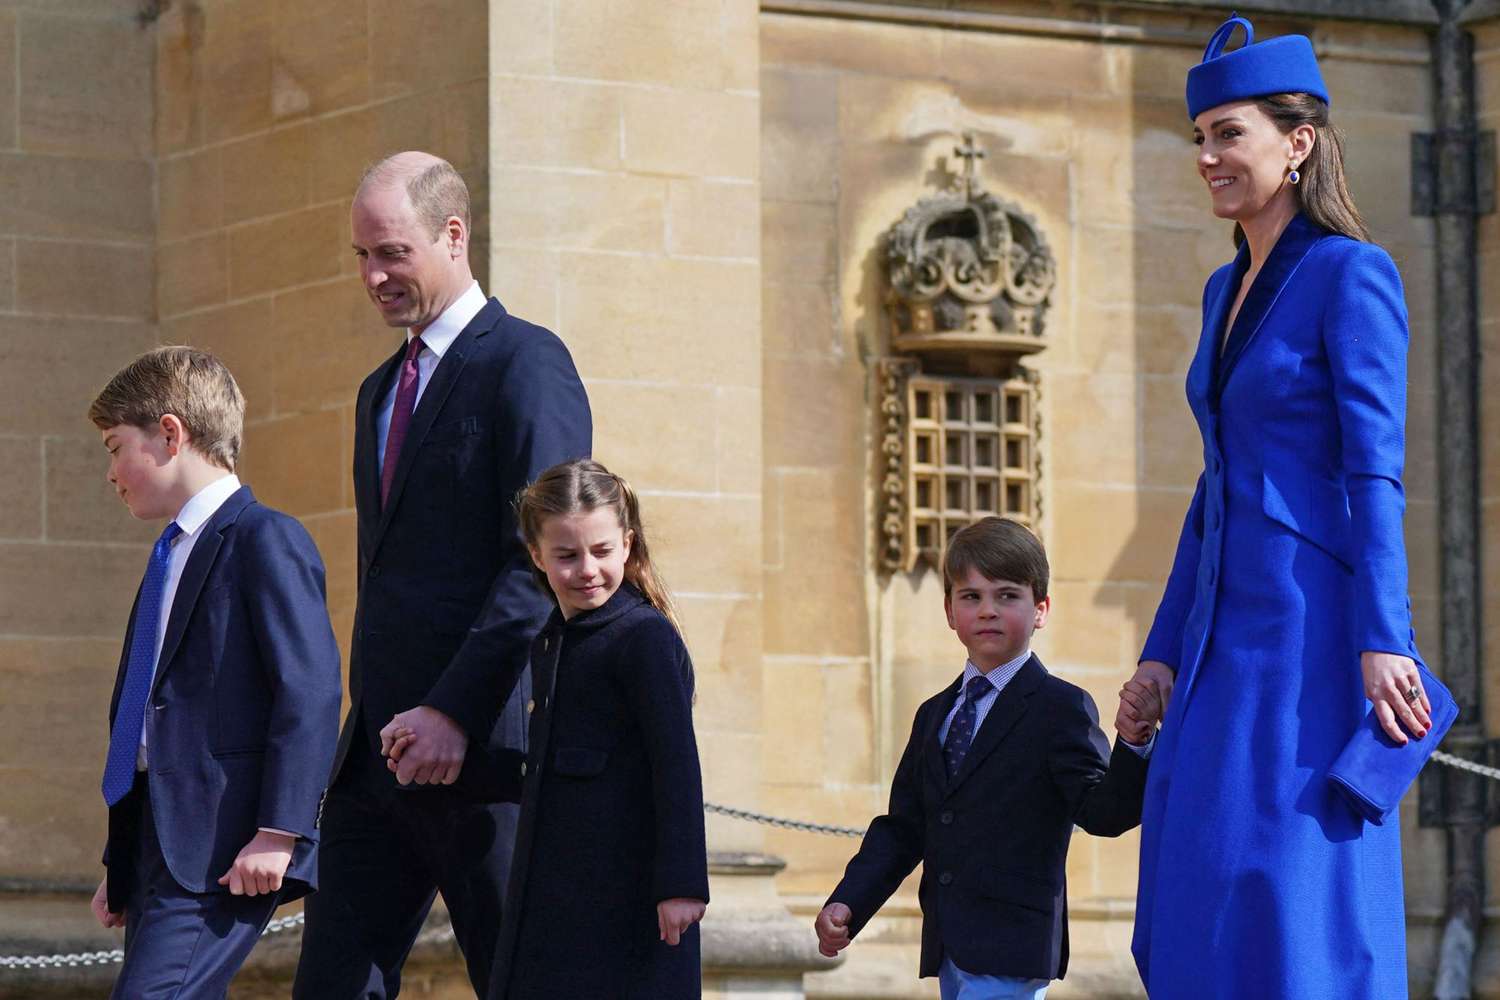 Happy Prince William and Wales Kids Delight Crowds in Royal Visit: The Heartwarming Connection. 14